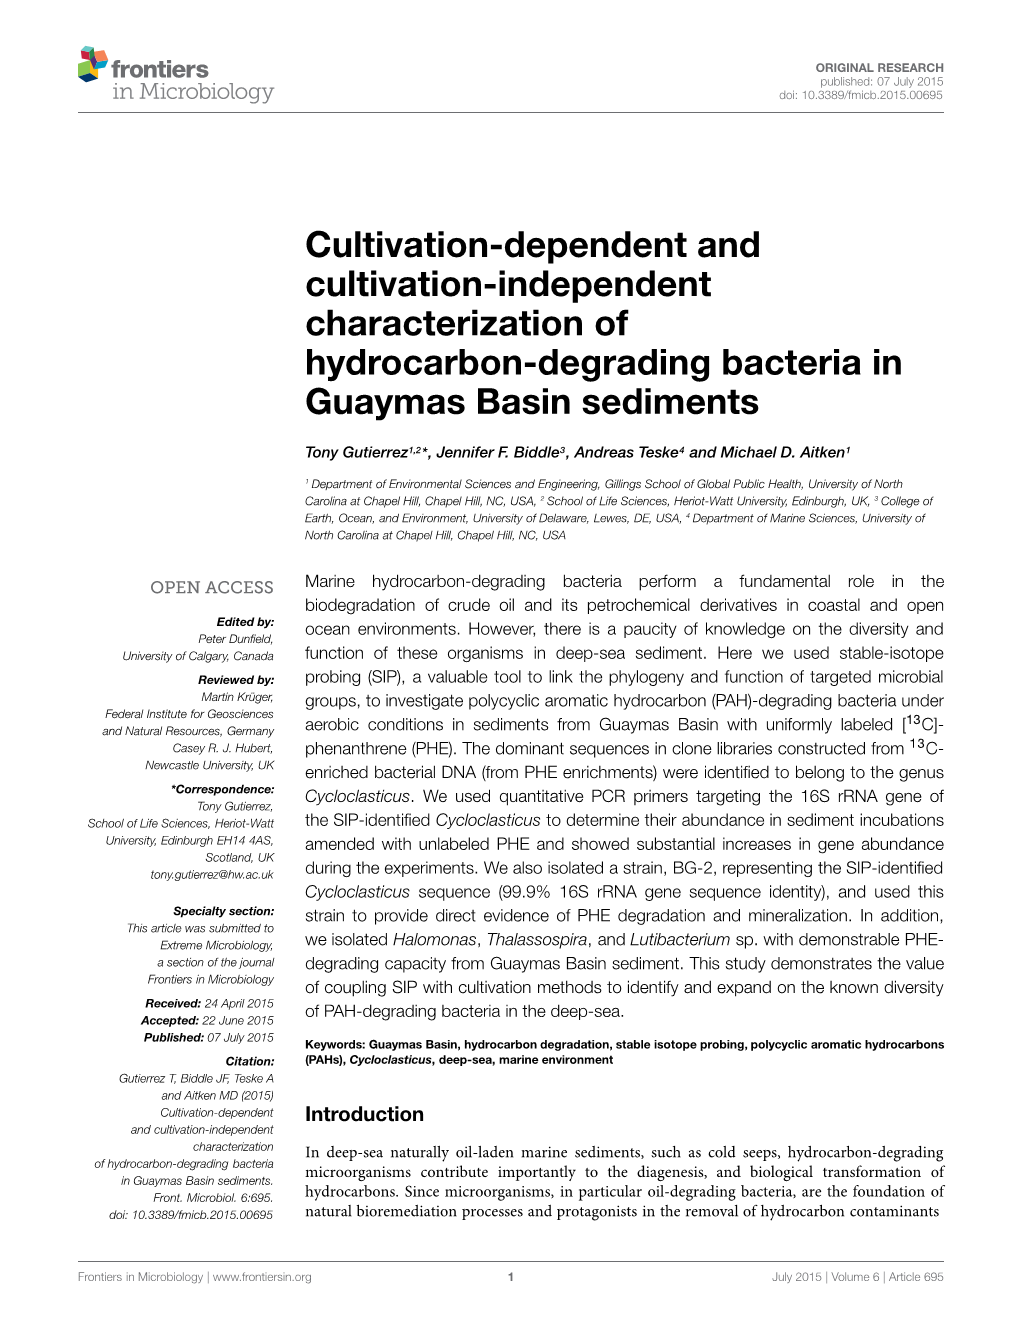 Cultivation-Dependent and Cultivation-Independent Characterization of Hydrocarbon-Degrading Bacteria in Guaymas Basin Sediments